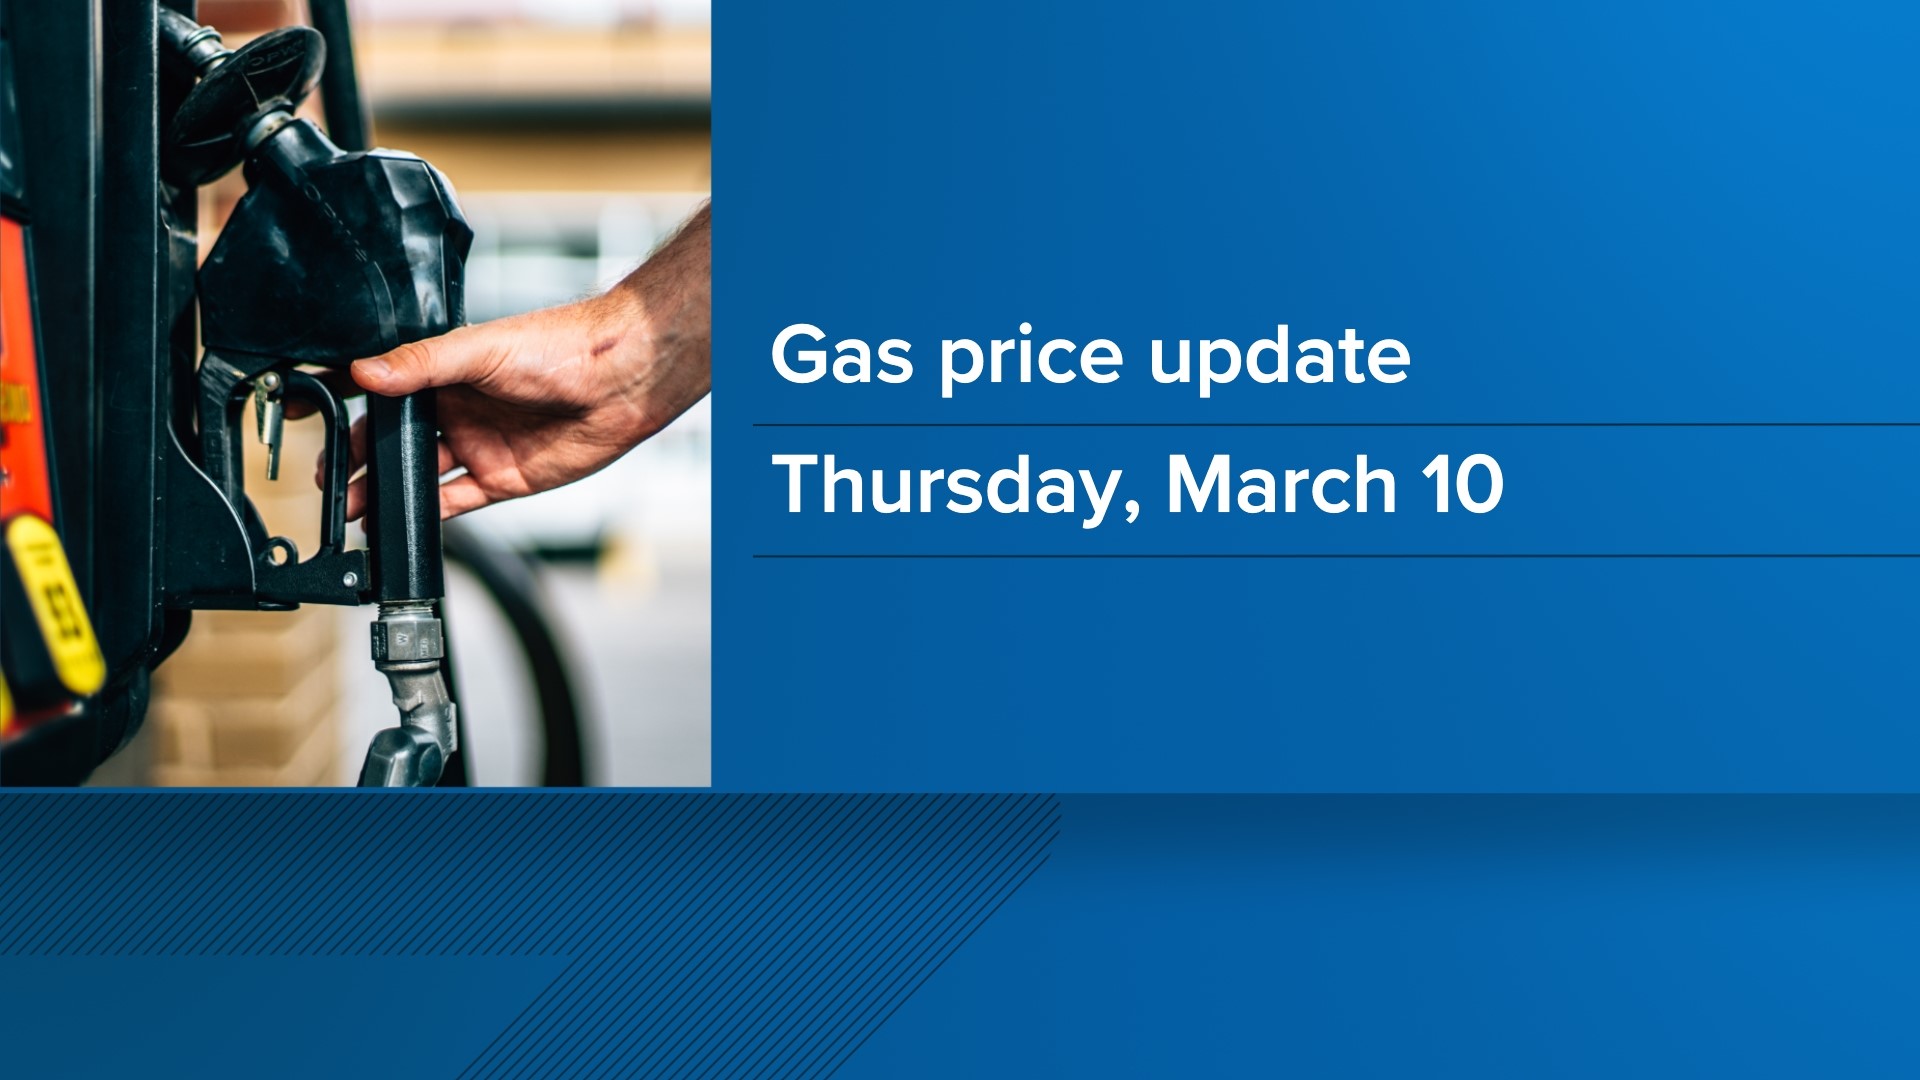 Jon Meyer has a closer look at gas prices here in our area.